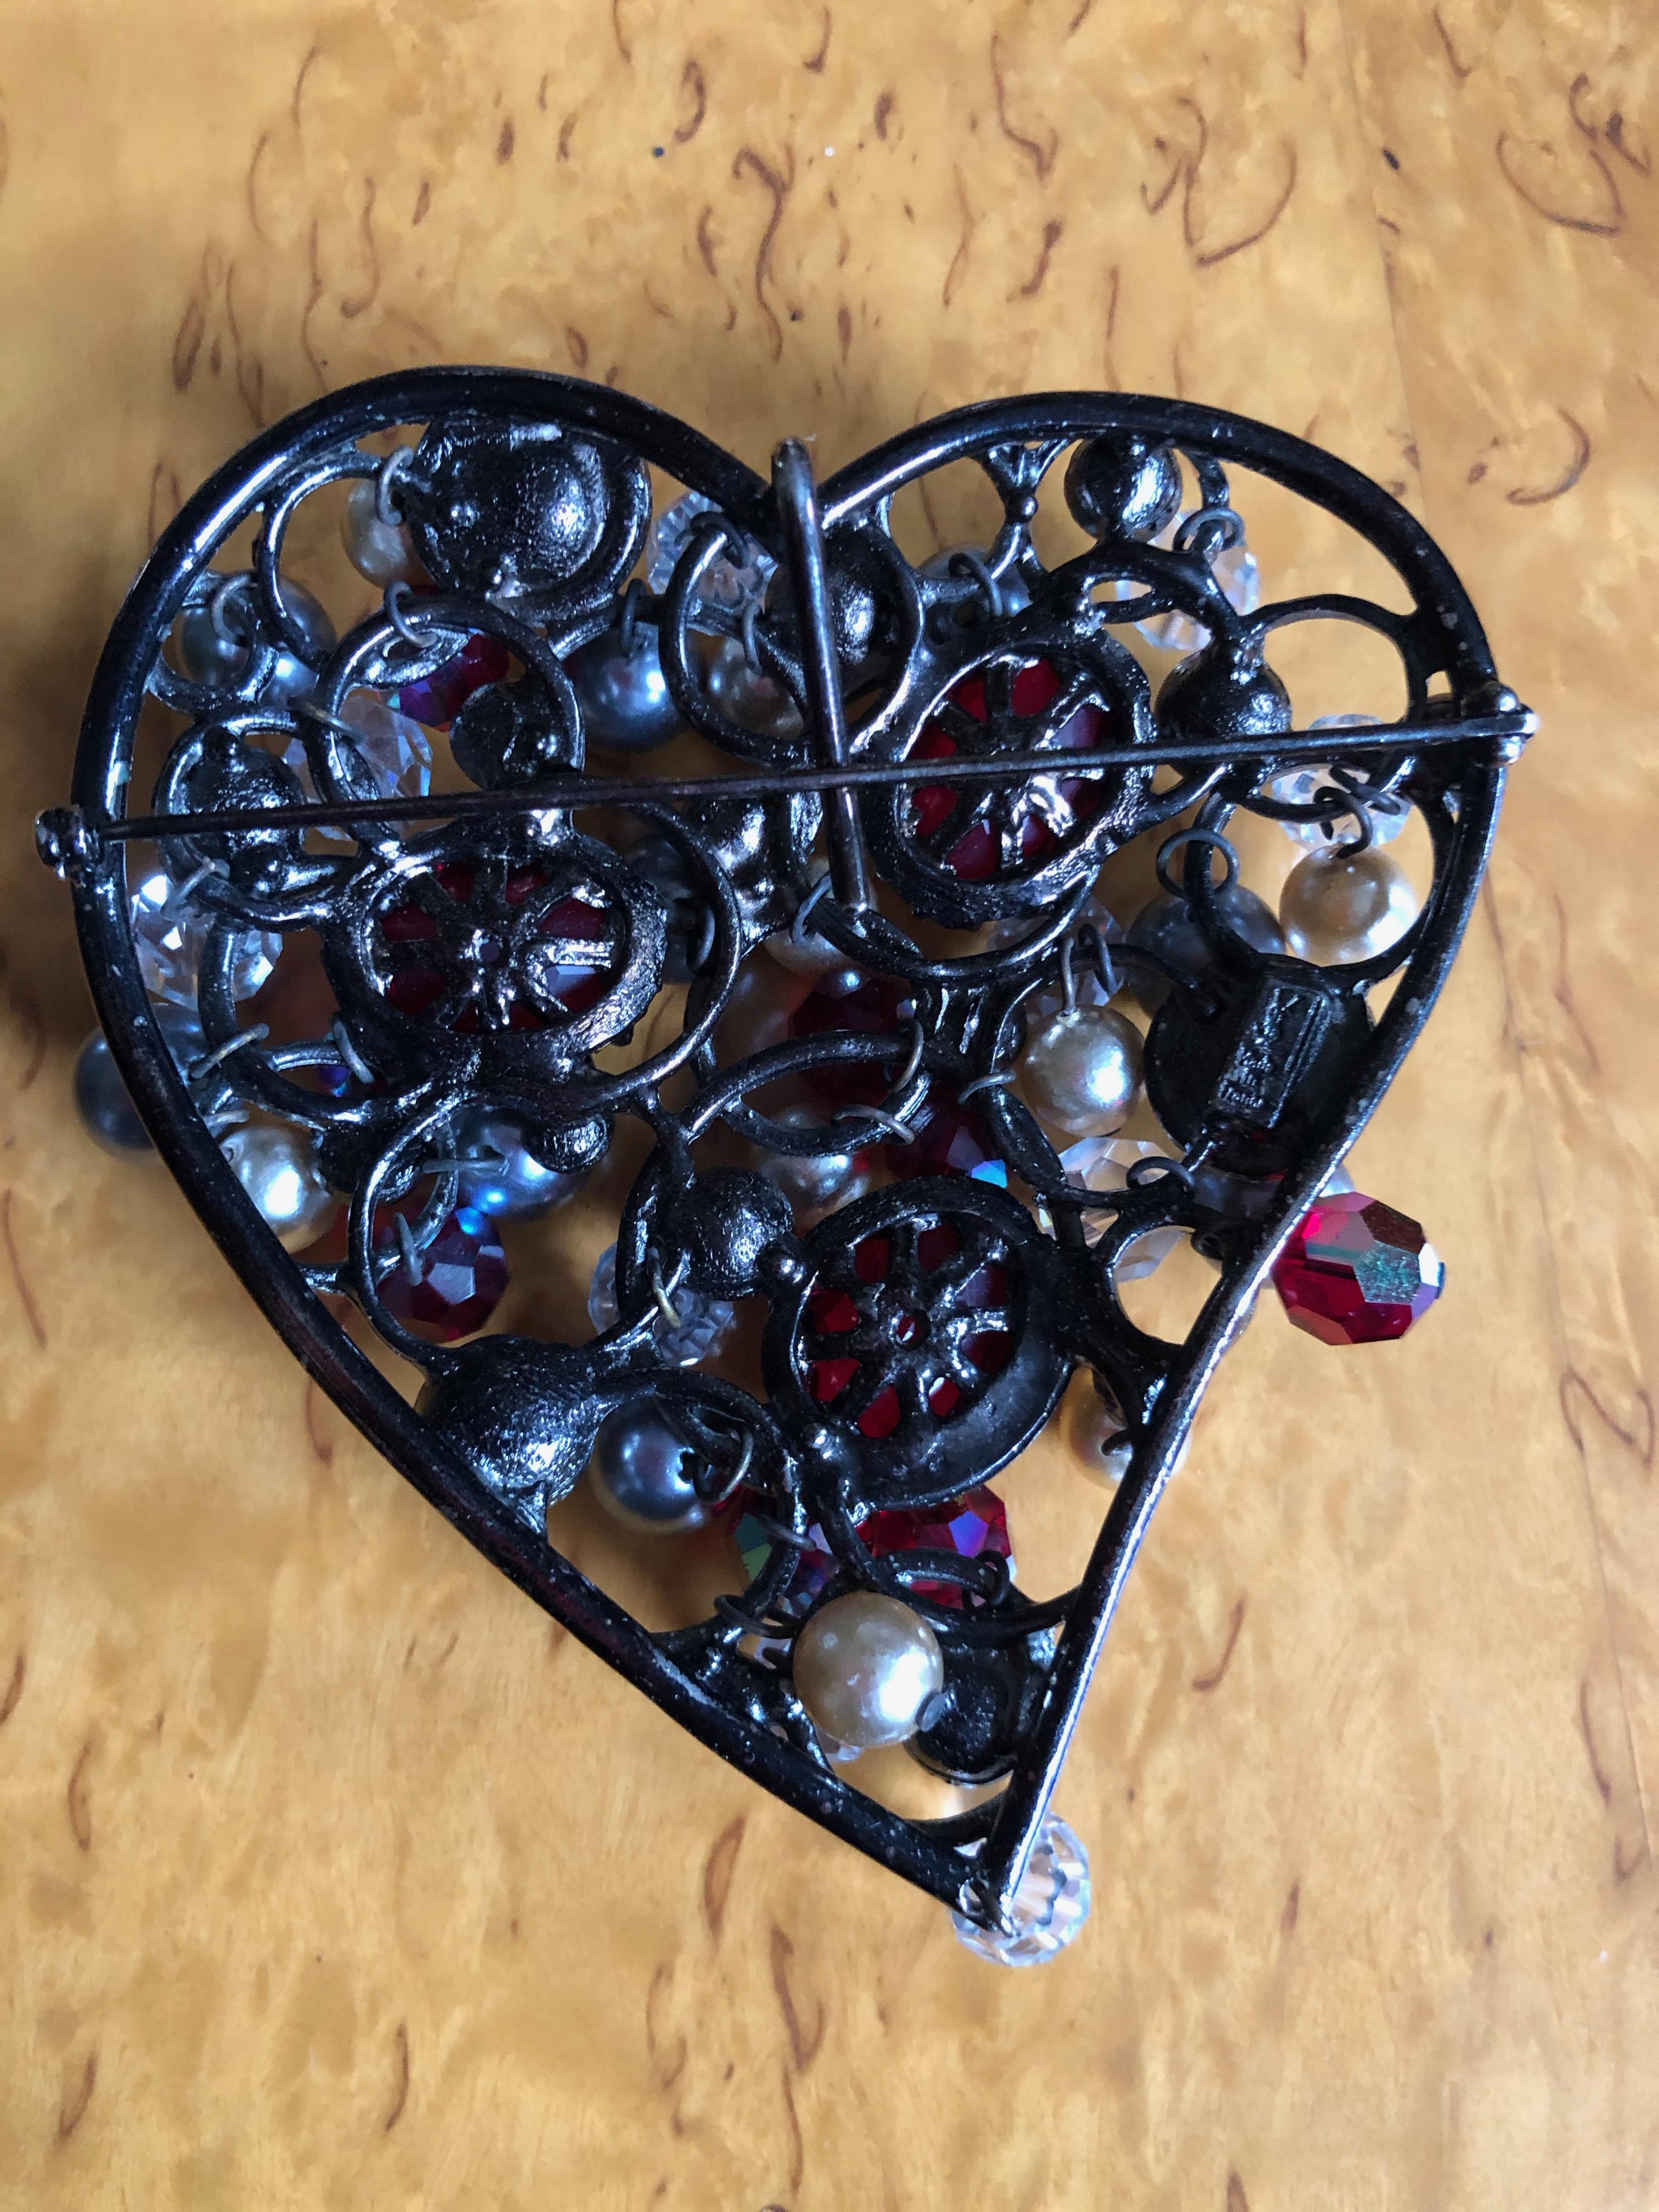 Yves Saint Laurent Rive Gauche Large Heart Pin Brooch with Tremblant Beads For Sale 2